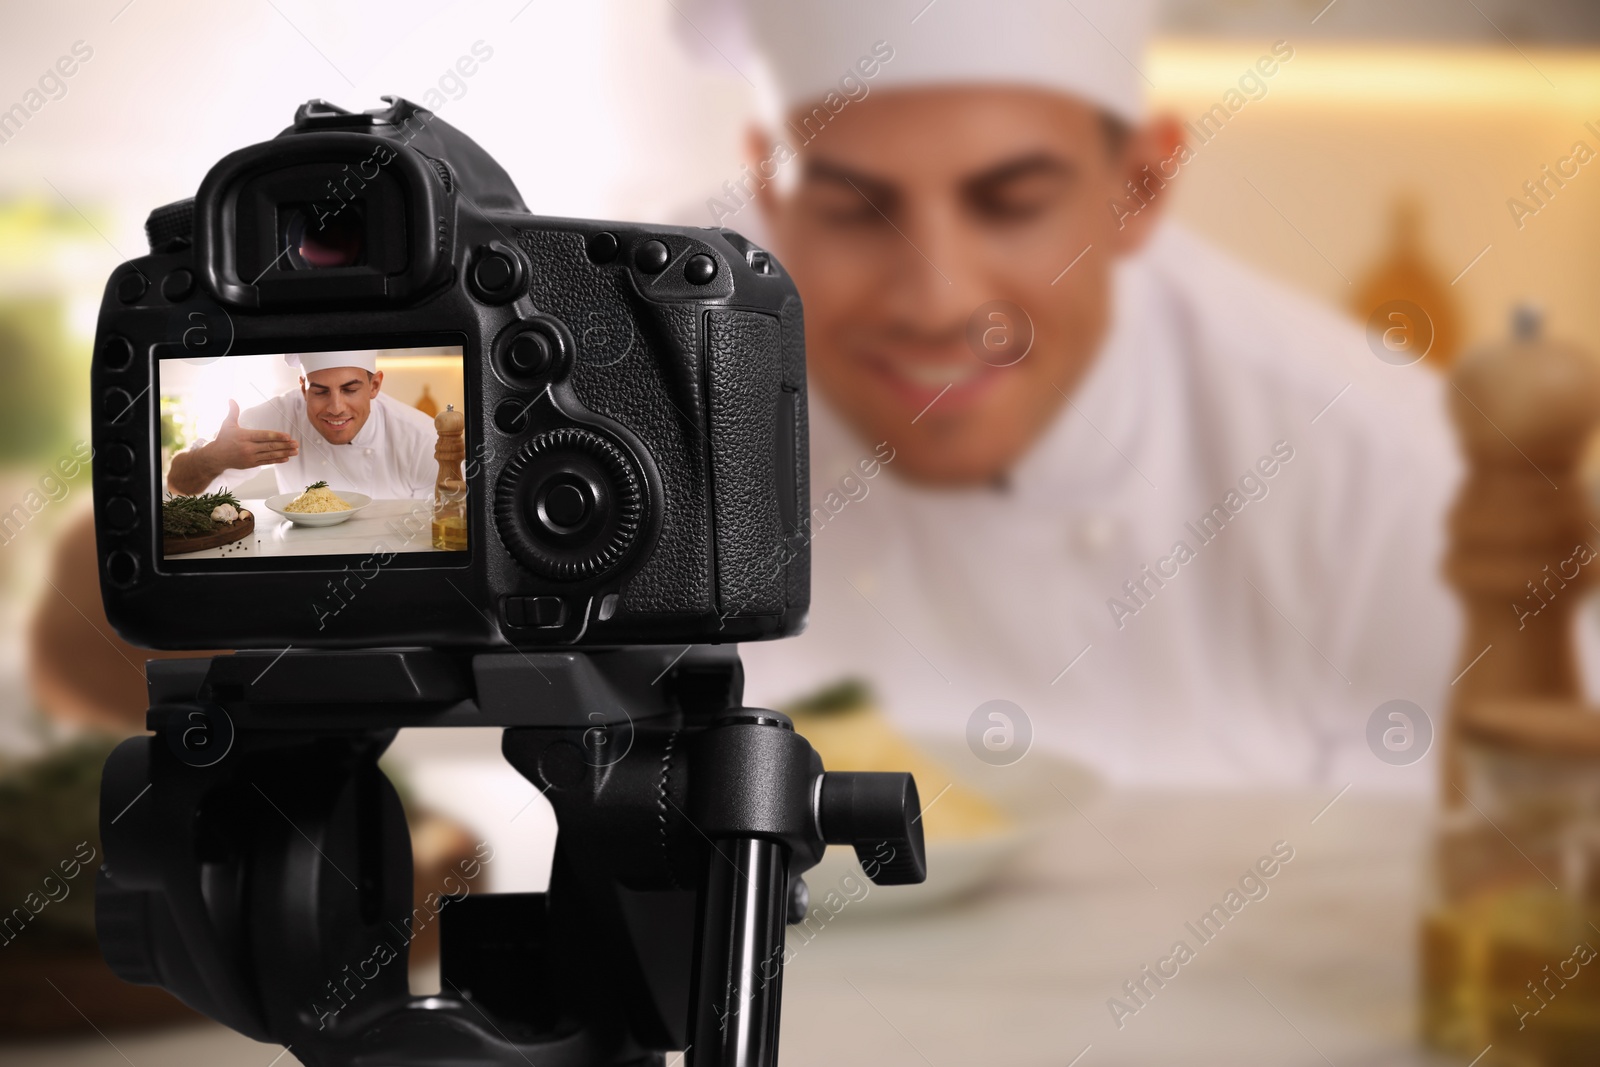 Image of Food photography. Shooting of chef with dish, focus on camera